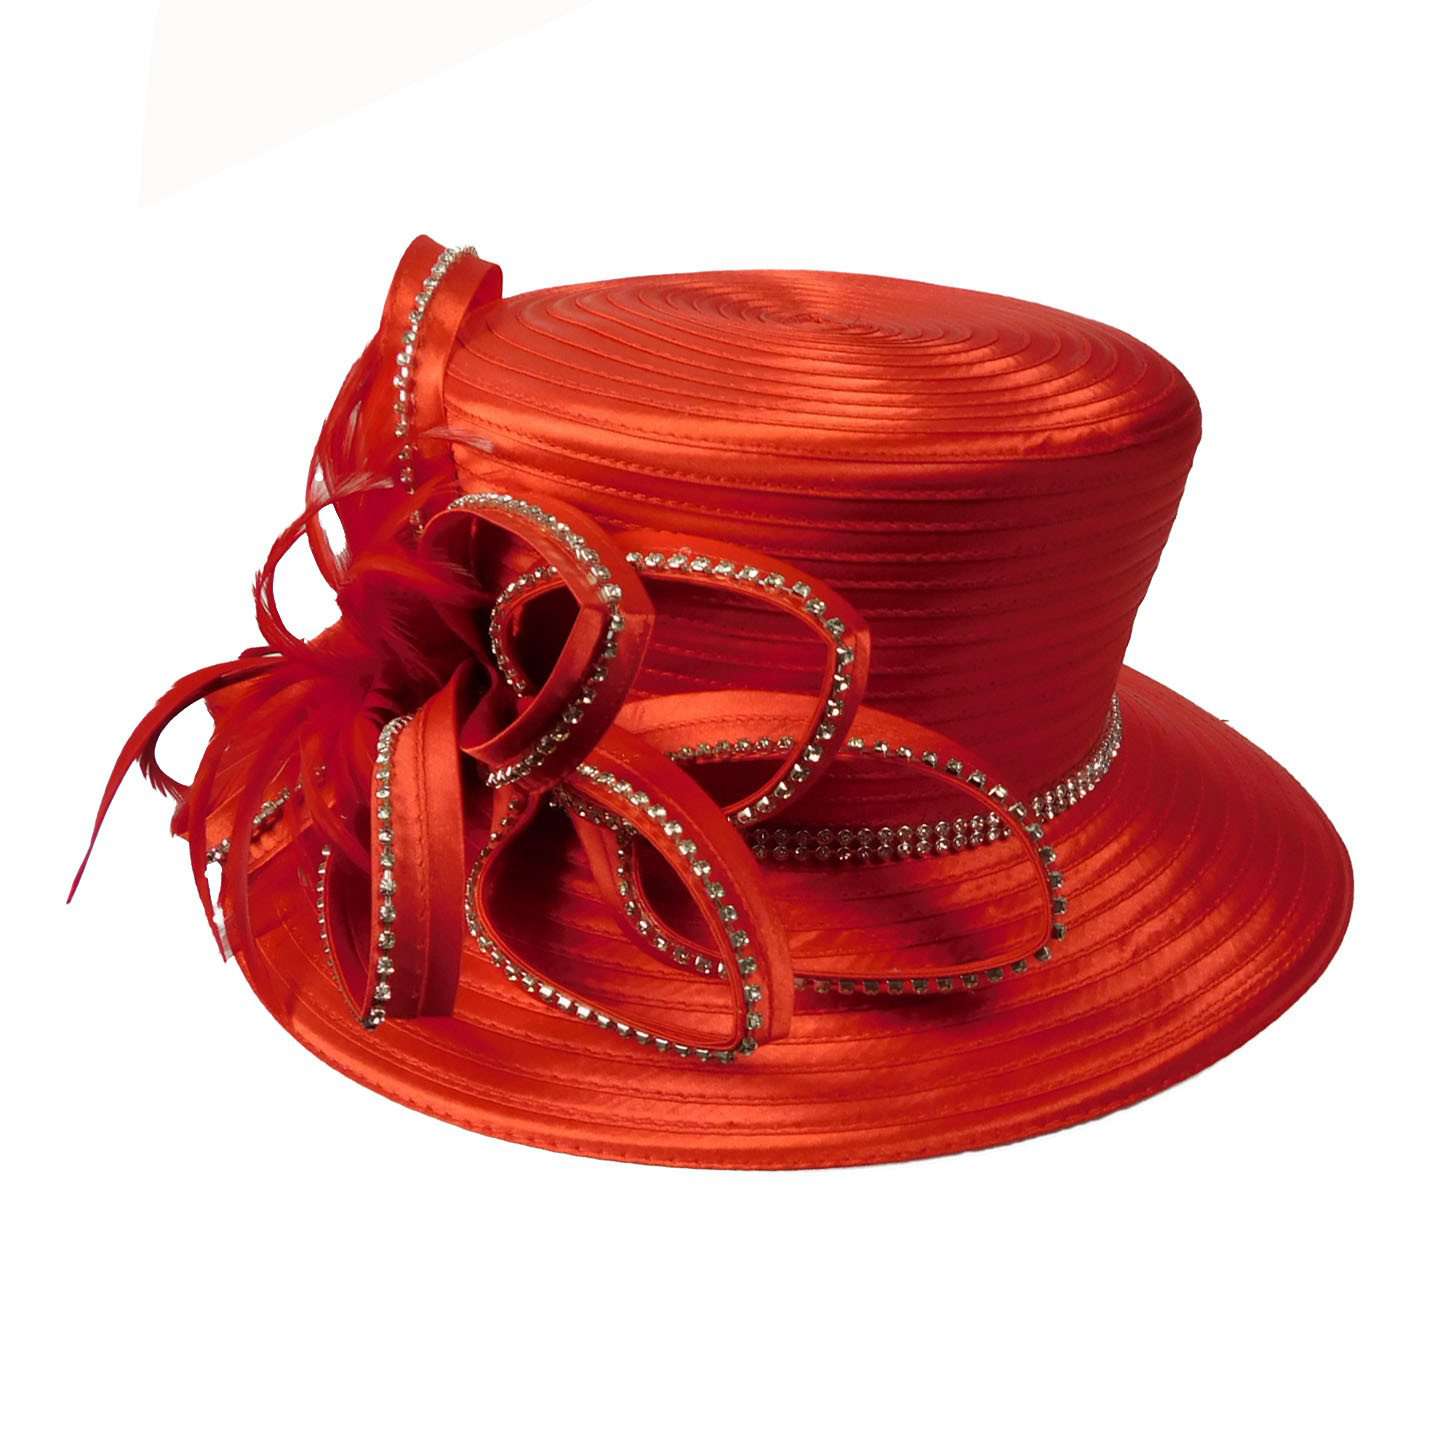 Satin Ribbon Dress Hat with Loopy Ribbon Accent Dress Hat Something Special LA WWSR806RD Red  